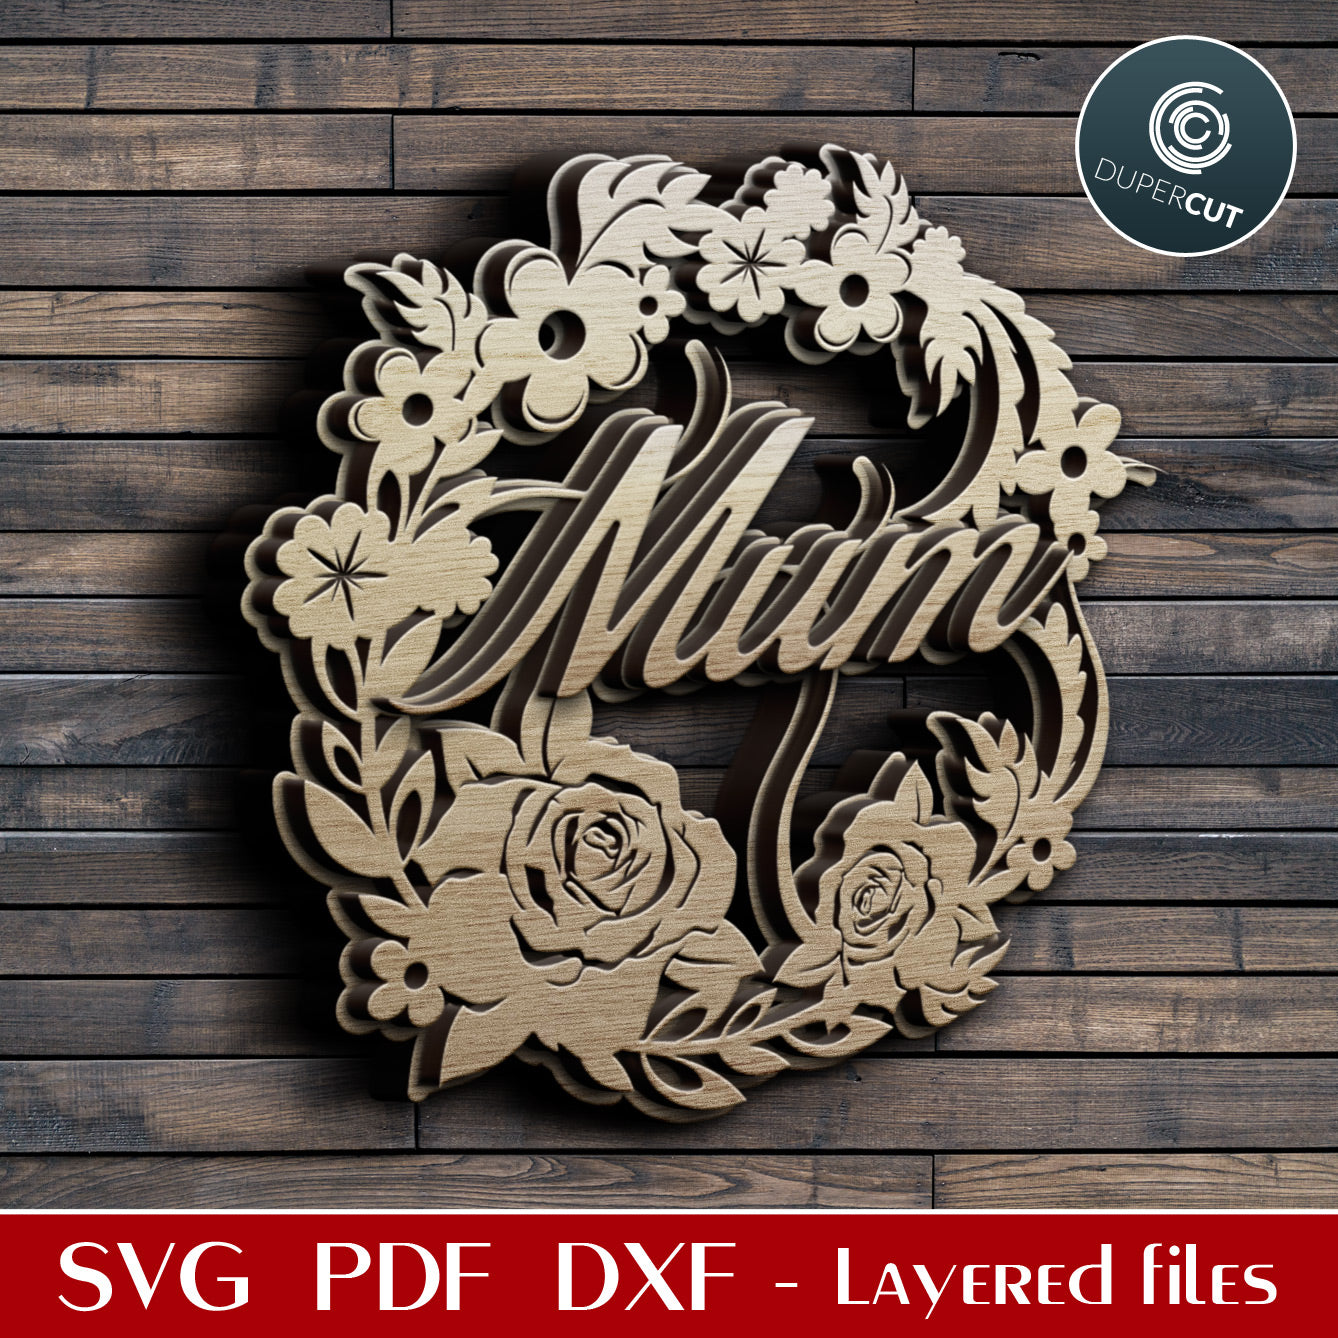 DIY gifto for mom, floral wreath layered cutting files - SVG PDF DXF vector files for laser cutting, Glowforge, Cricut, Silhouette Cameo, CNC plasma machines